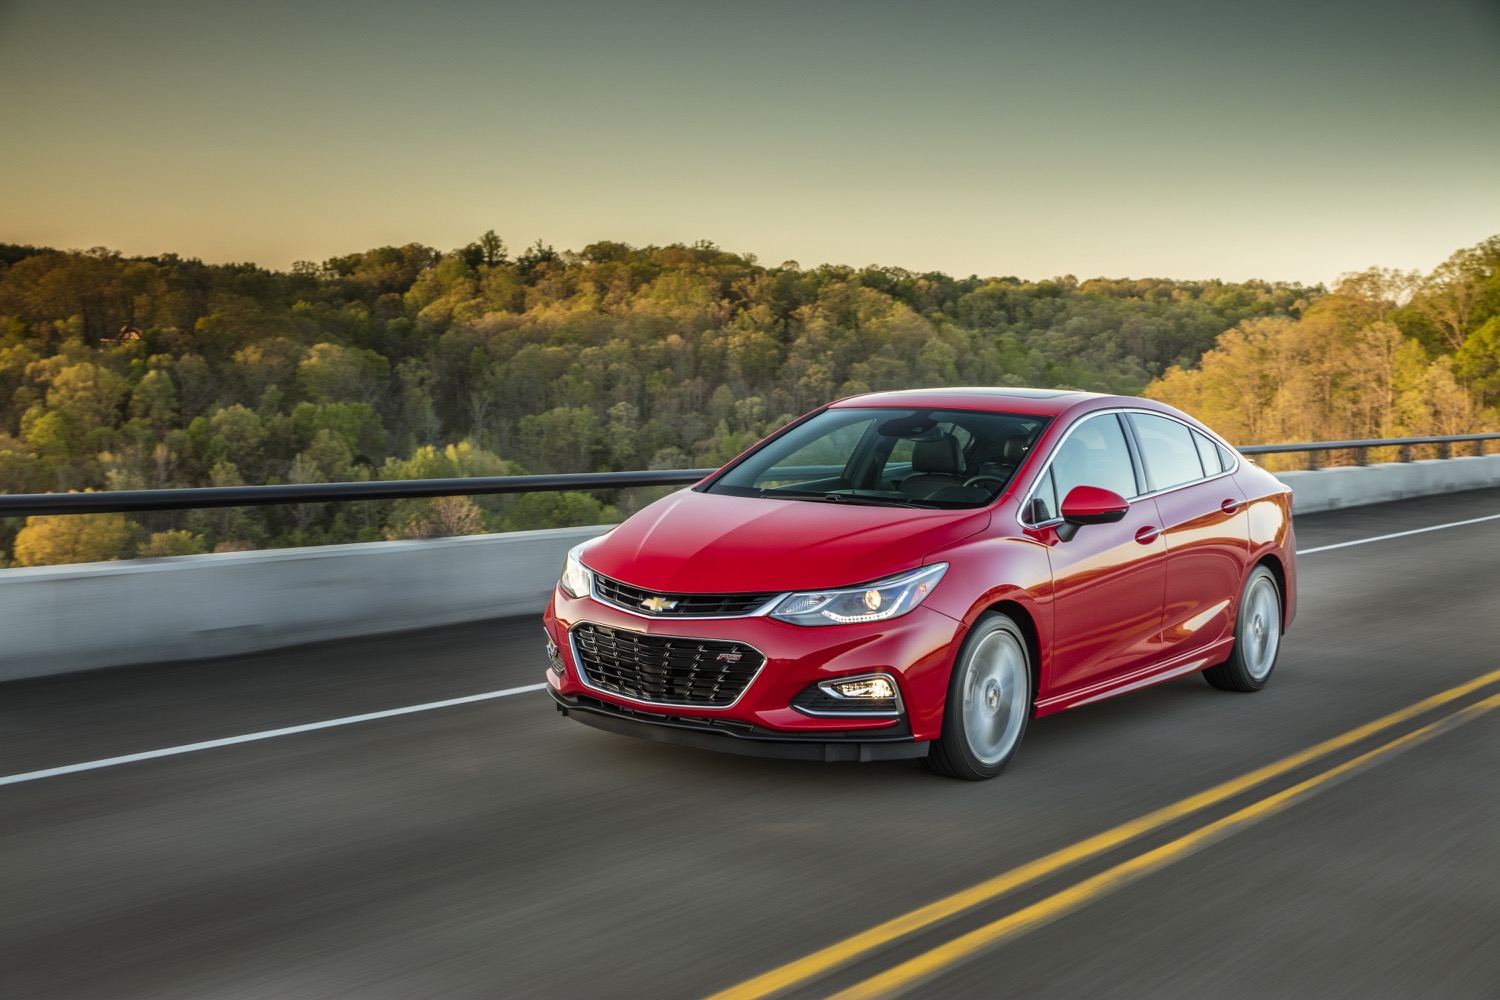 Chevy Cruze Among Most Fuel-Efficient Used Compact Cars